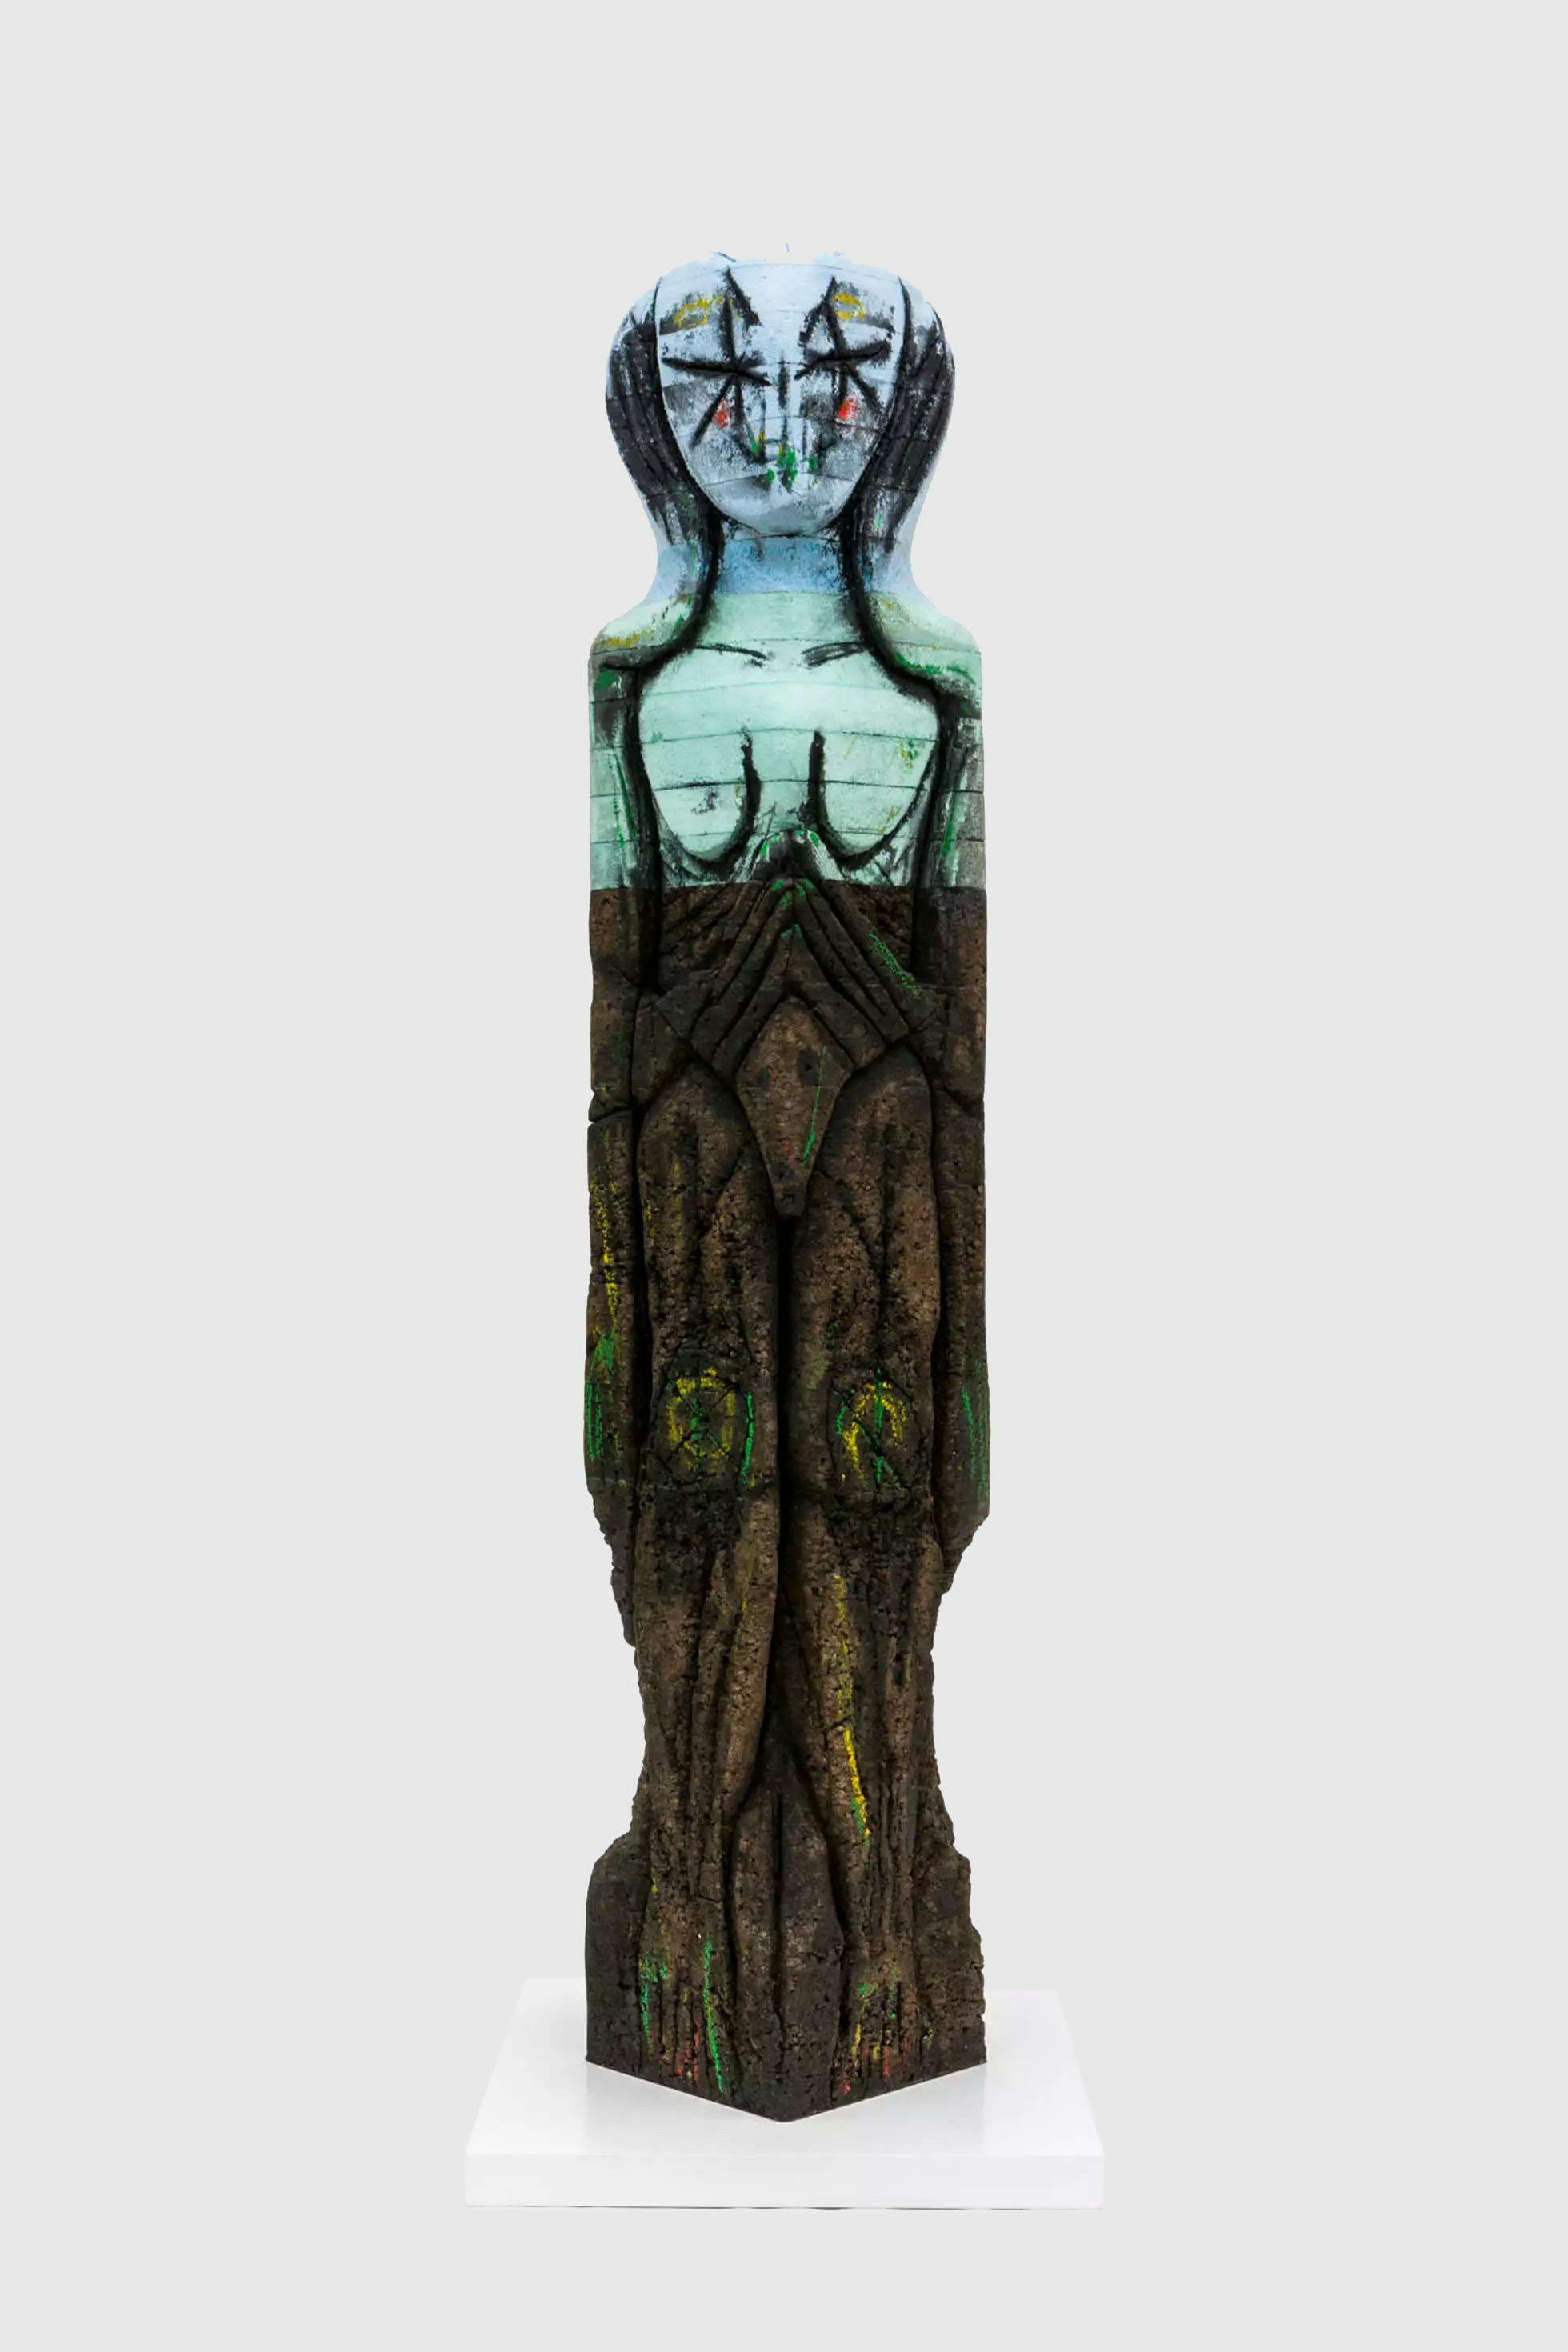 A sculpture by Huma Bhabha, titled The Hood Maker, dated 2019.